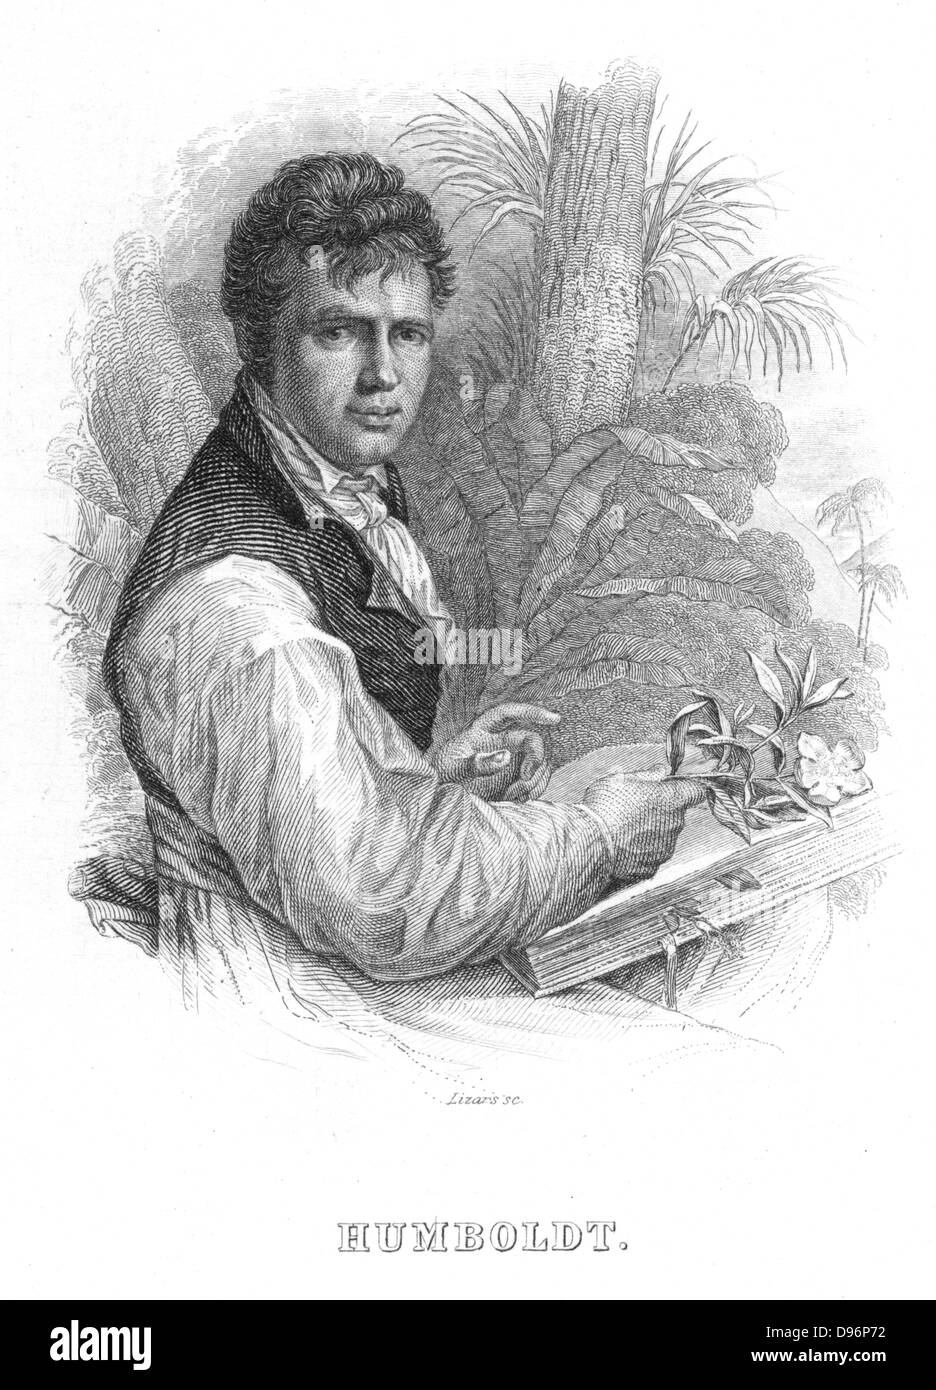 (Friedrich Wilhelm Heinrich)  Alexander von Humboldt (1769-1859) German naturalist. Humboldt's interests included geophysics, geology and botany, and he is sometimes called the founder of ecology. He is shown here at the time of his expedition in South America (1800-1804) when, with the French botanist Aime Bonplond (1773-1858), he explored the Orinoco and Amazon regions and collected 60,000 plant specimens.  Engraving (Edinburgh, c1830). Stock Photo